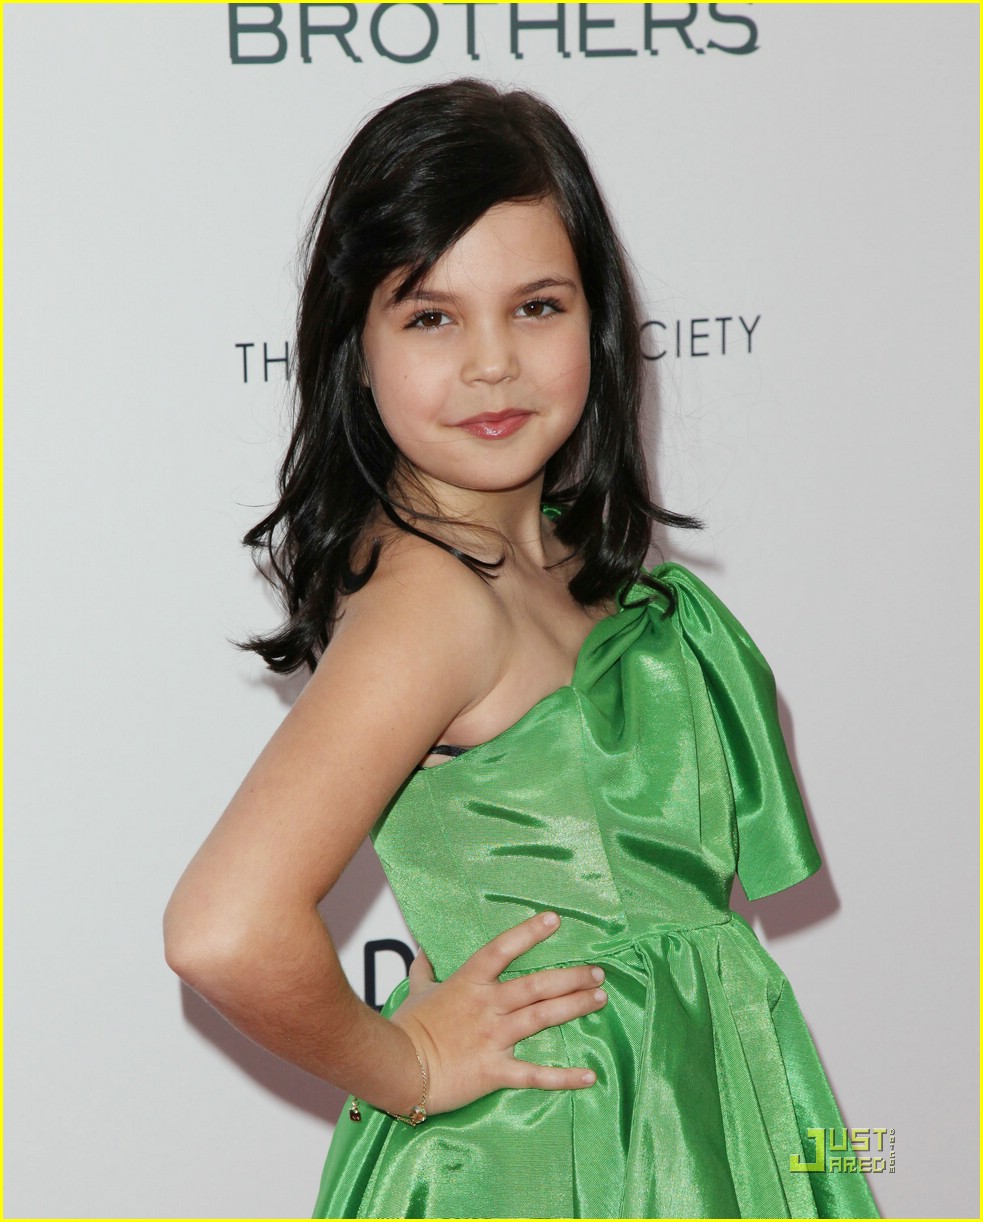 bailee madison brothers premiere 11